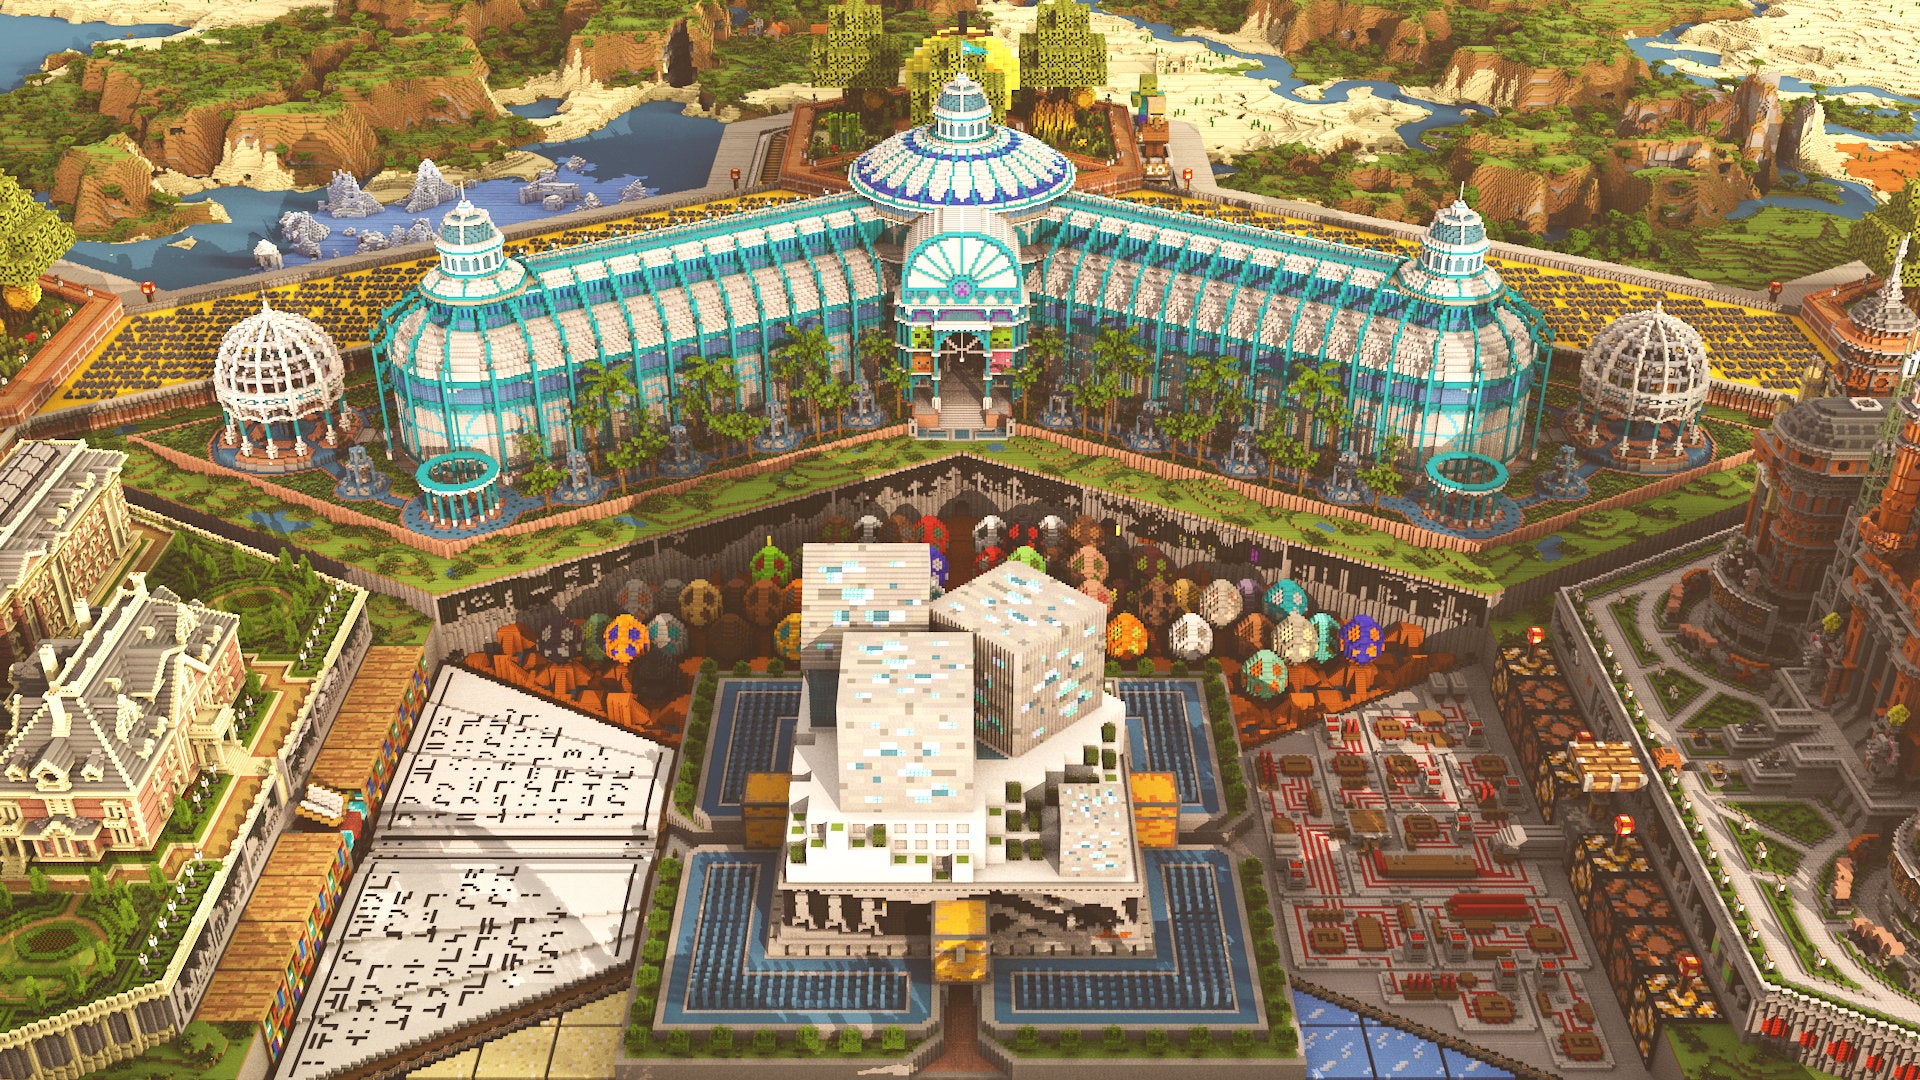 Image for Visit Minecraft's theme park map to celebrate its 10th birthday